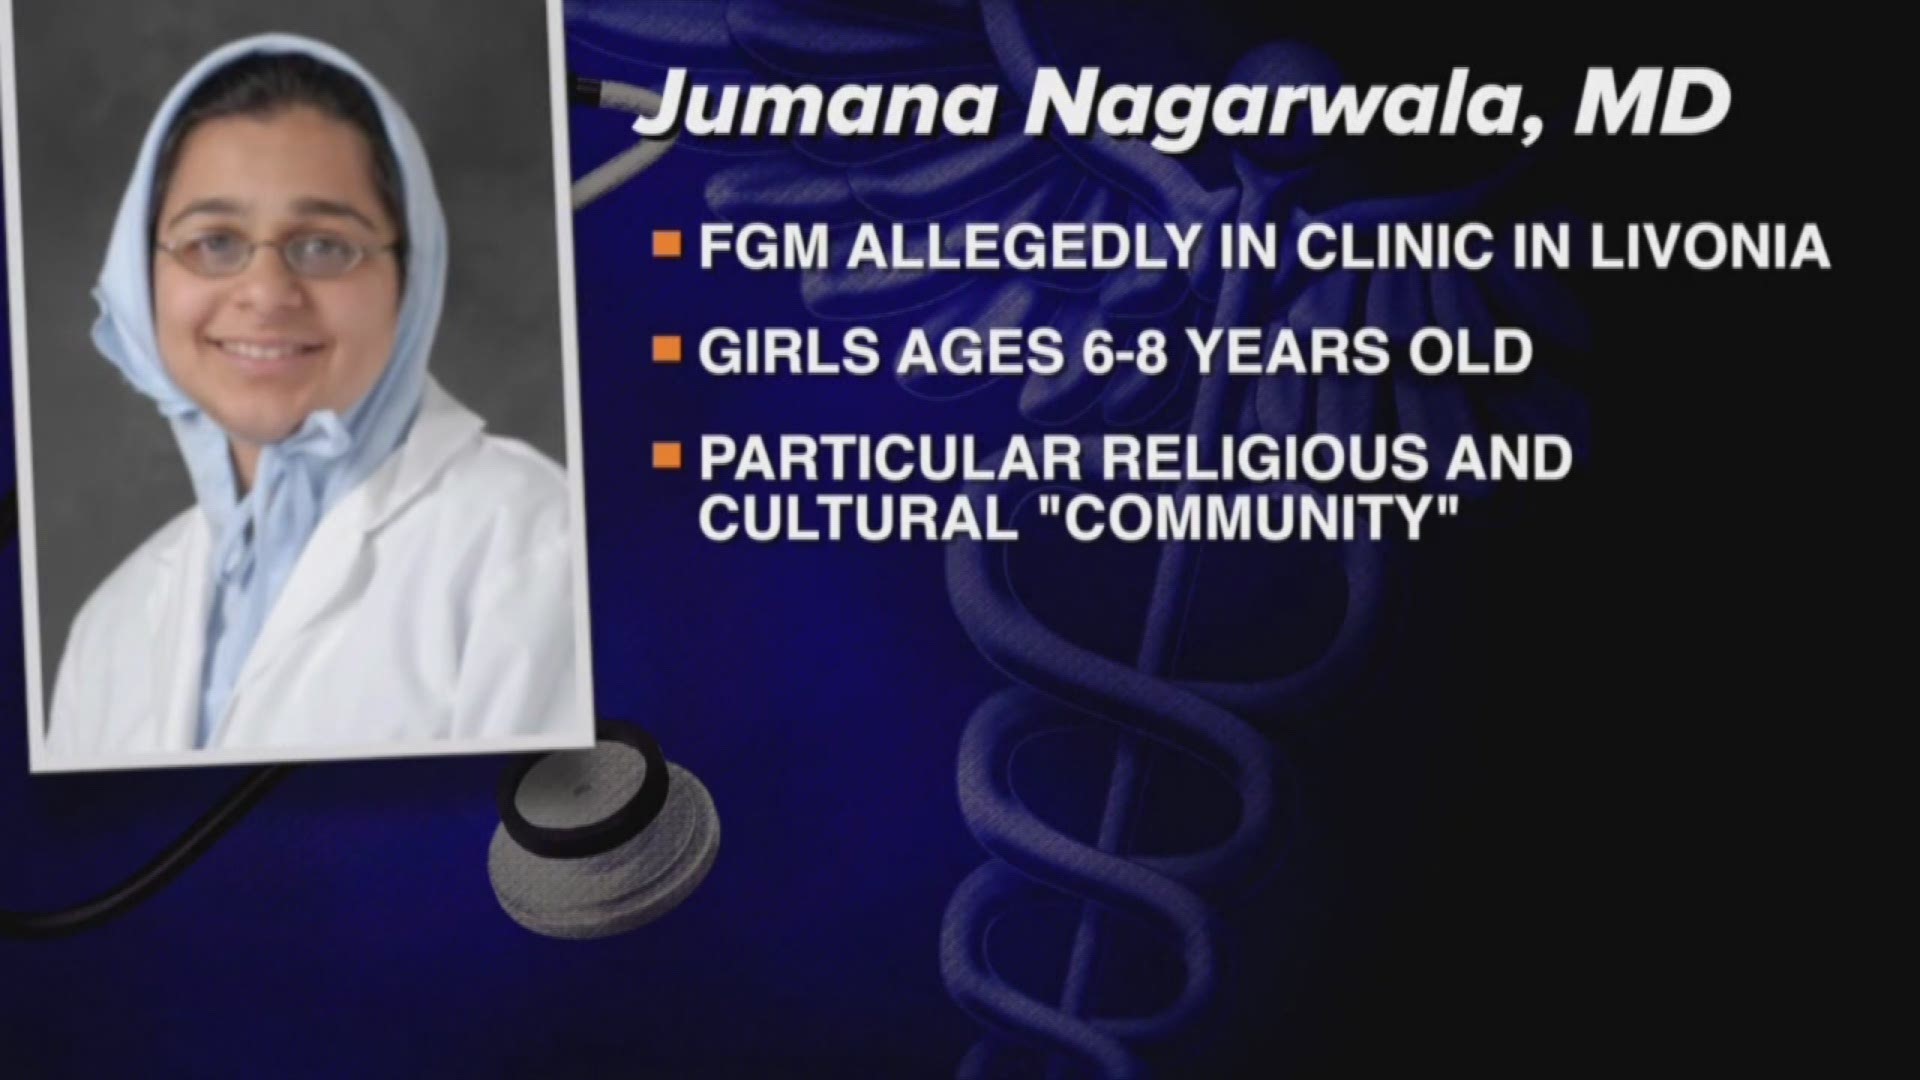 Detroit-area doctor faces federal charges for genital mutilating young girls